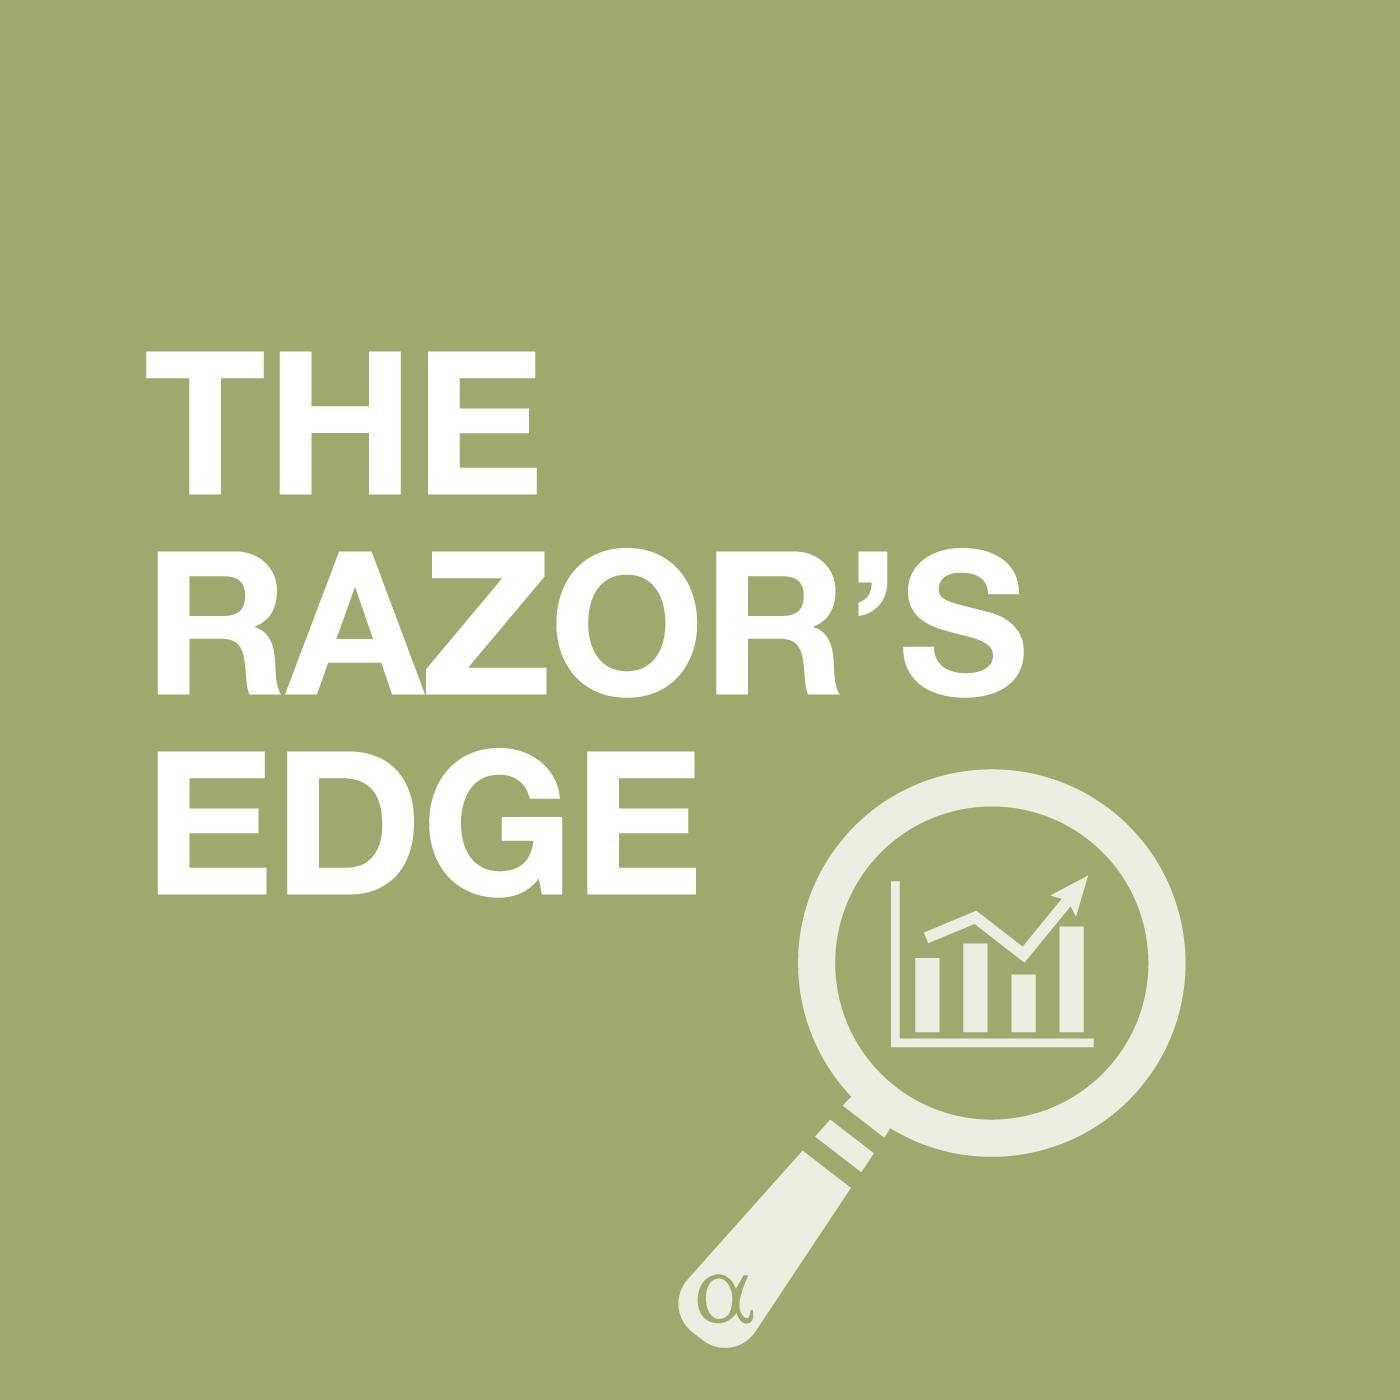 The Razor's Edge #14: Snap's Crackling Earnings Pop and The Internet Advertising Space